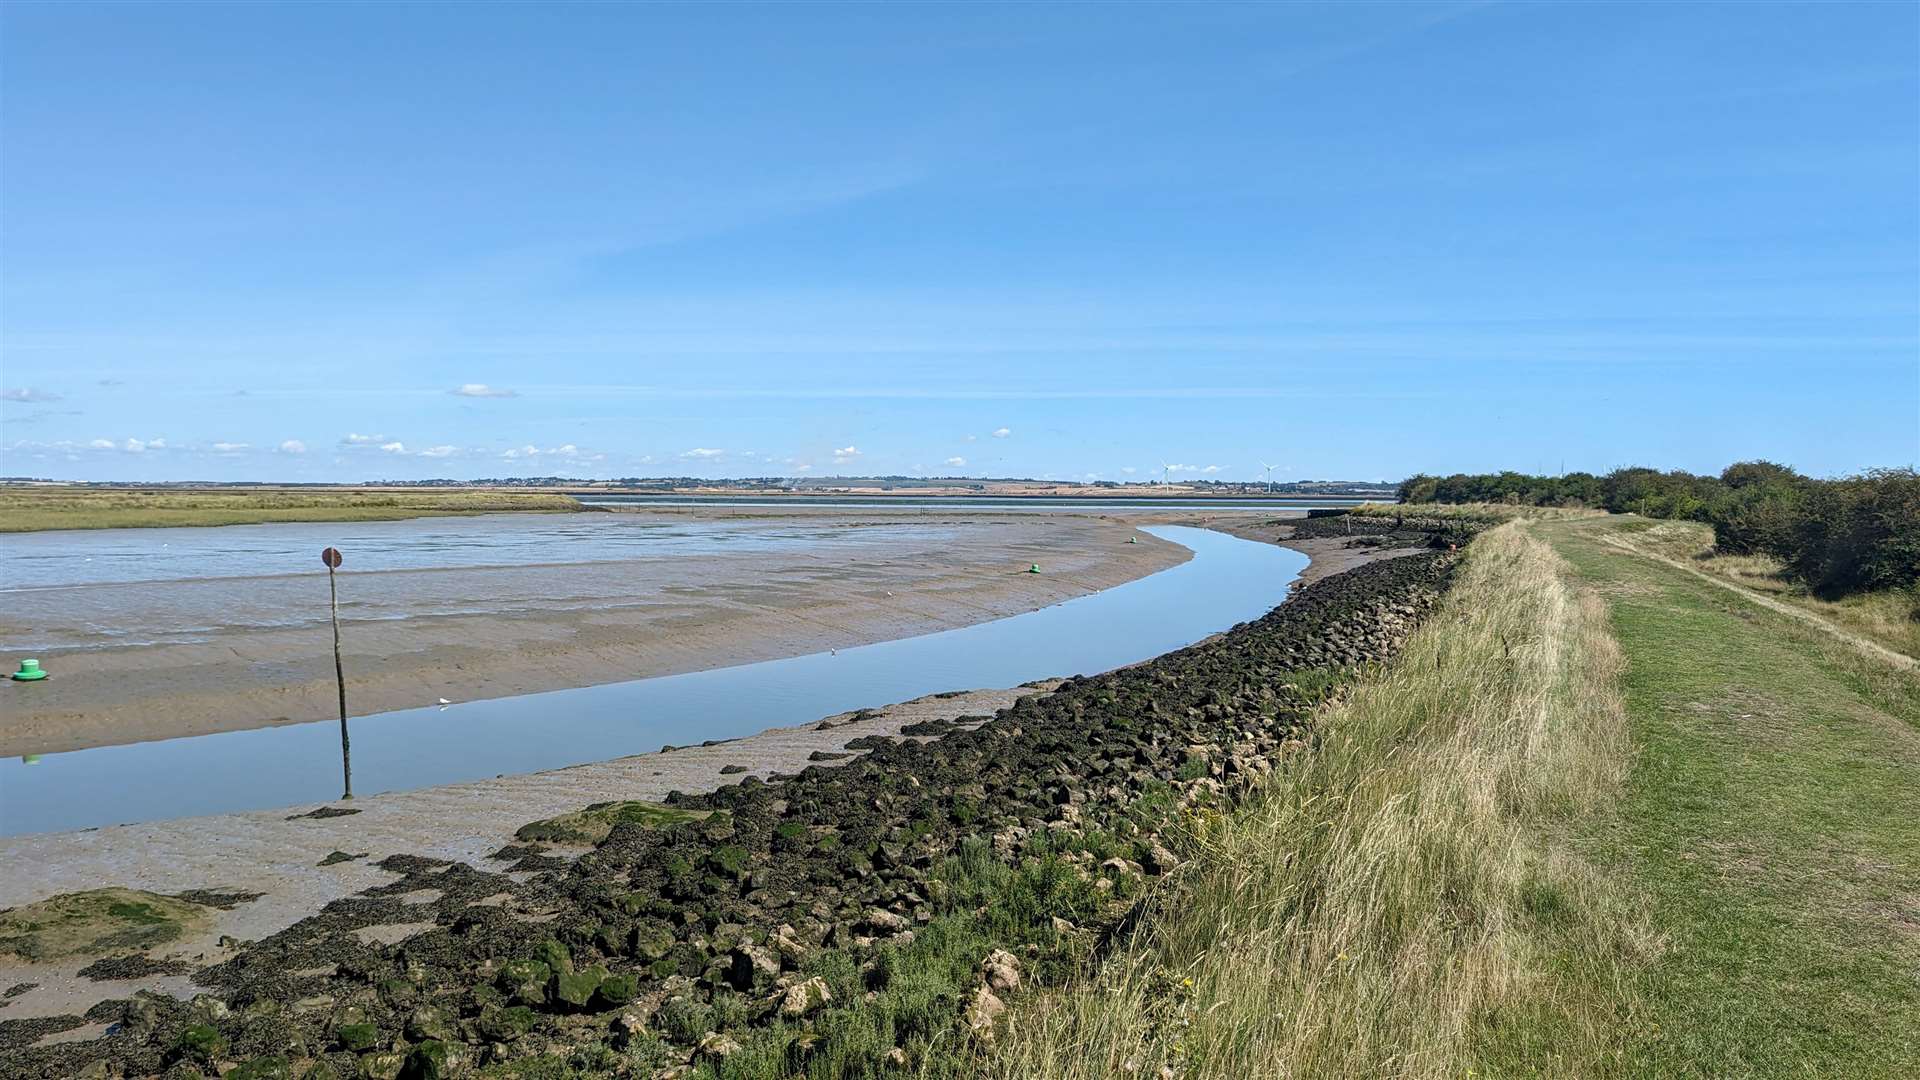 Low tide in the Swale revealed extensive mudflats